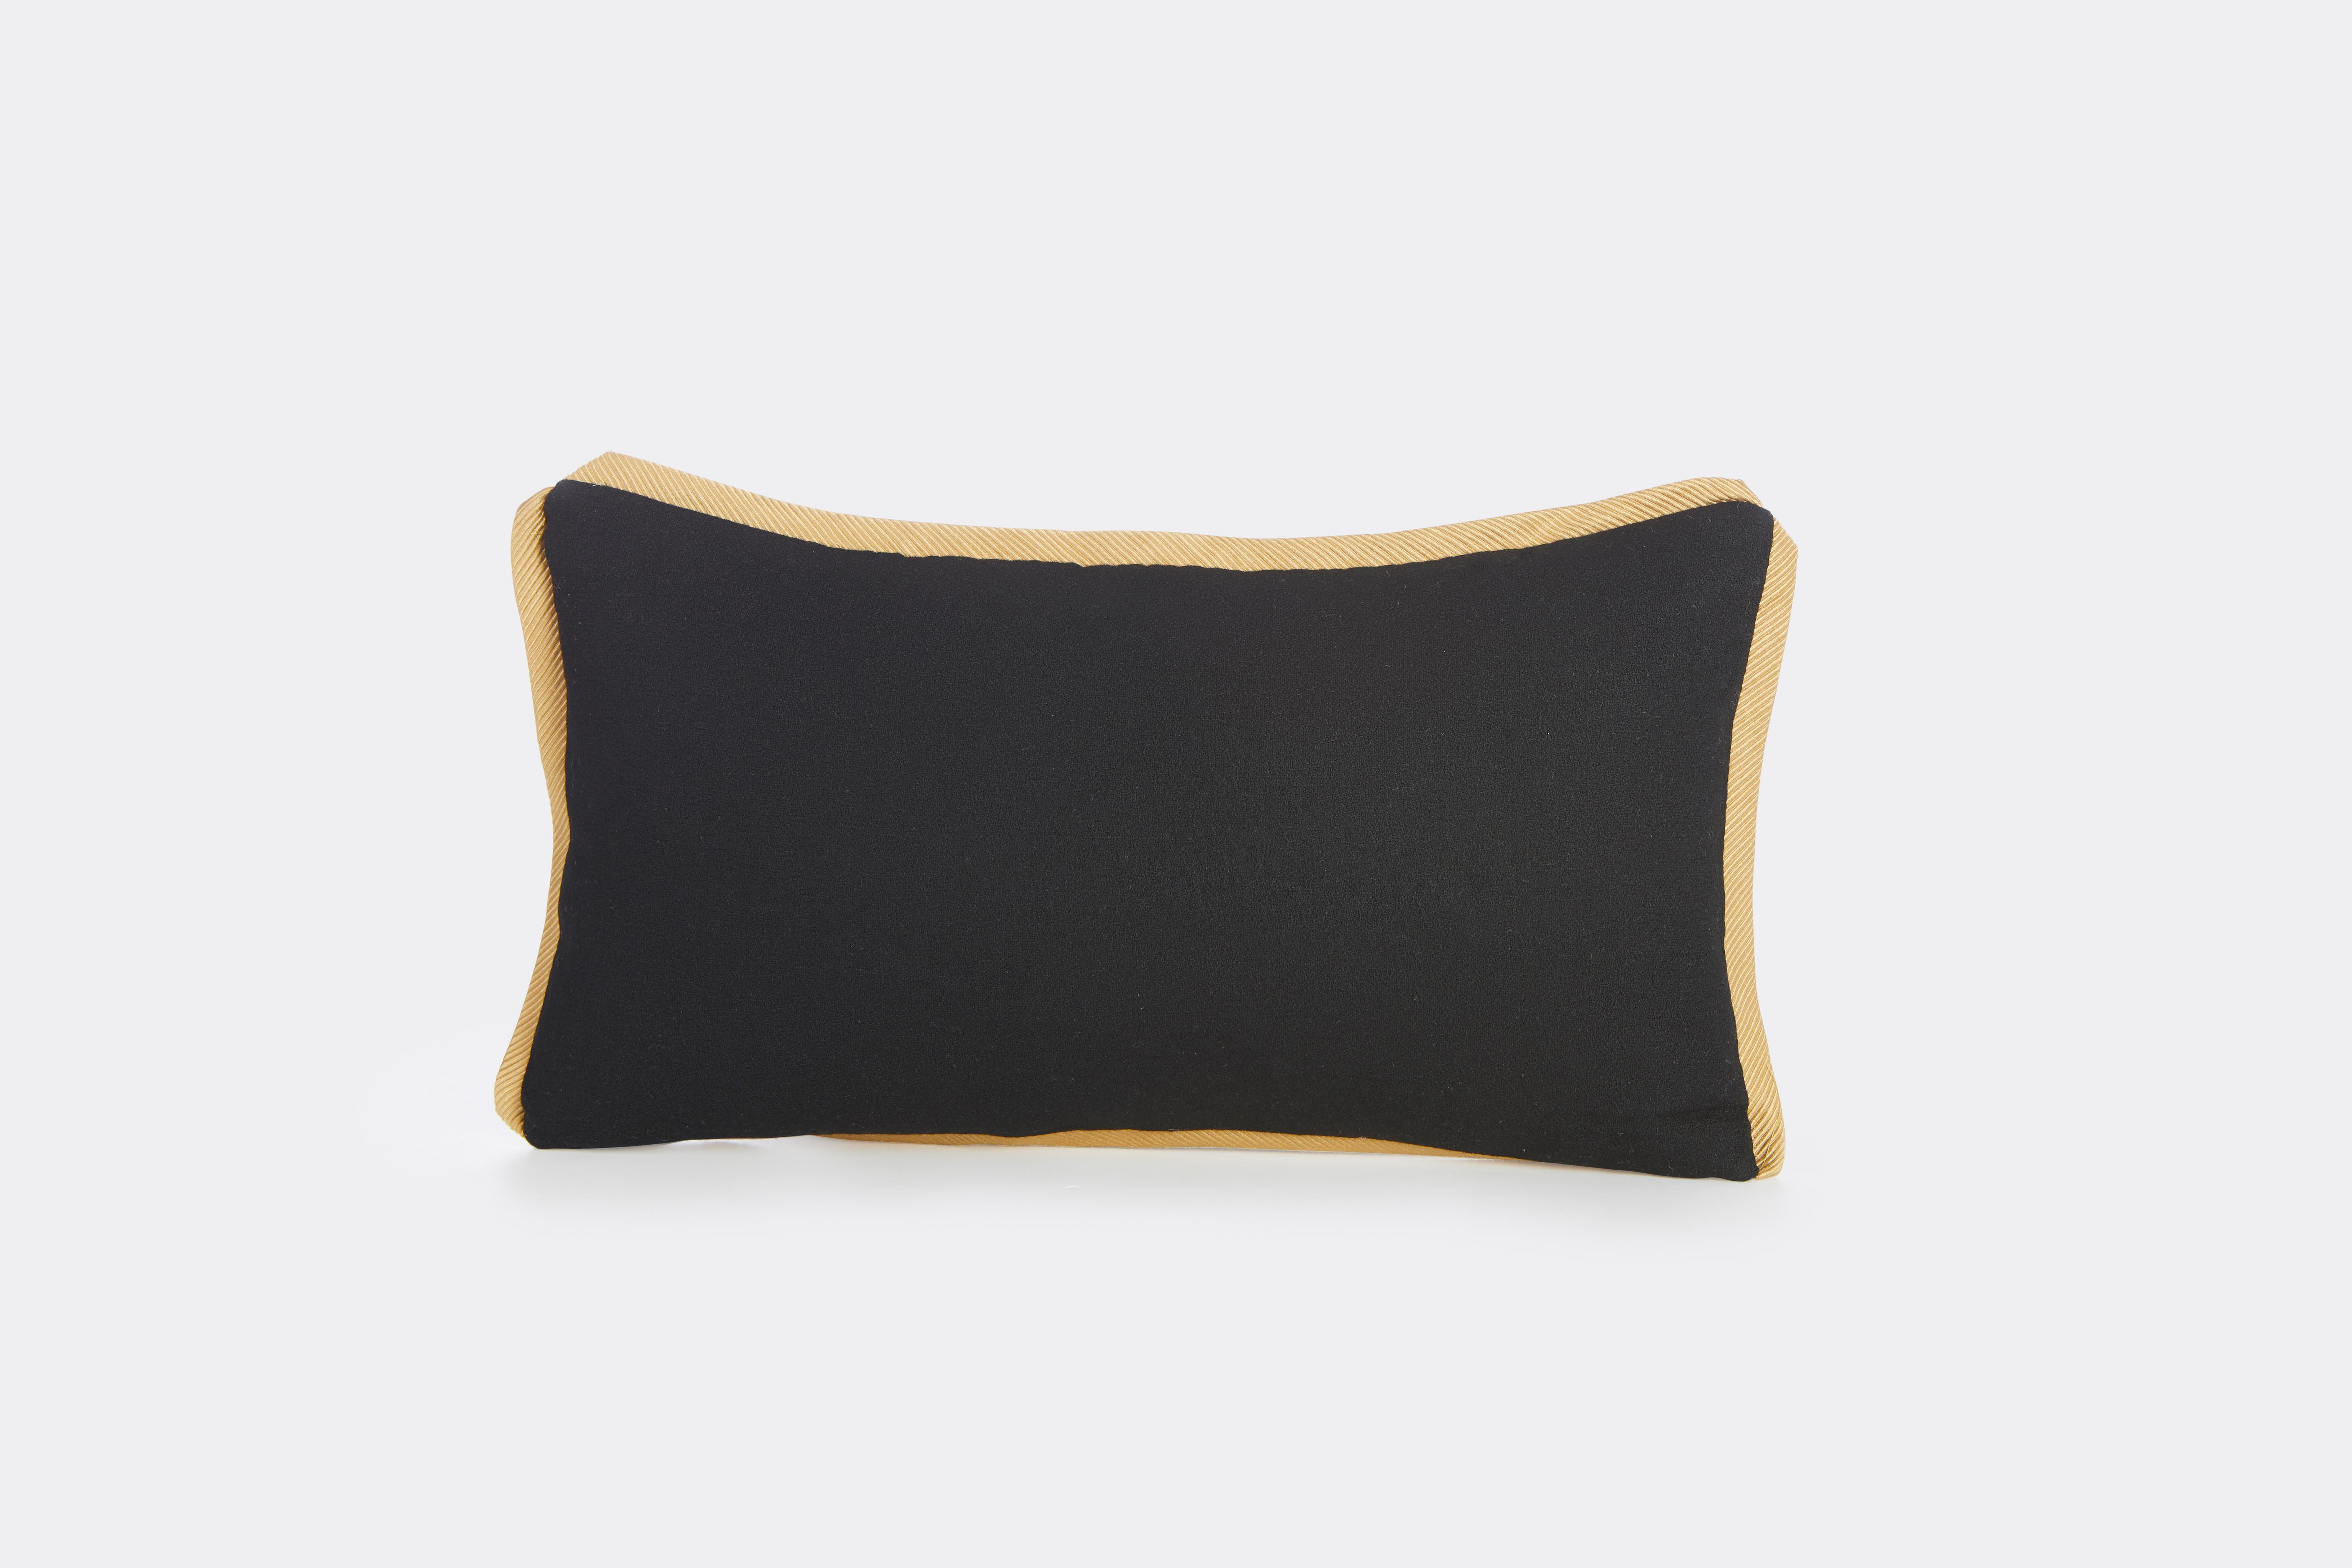 Contemporary Brocaded Silk with Metallic Thread Dries Van Noten Fabric Cushion For Sale